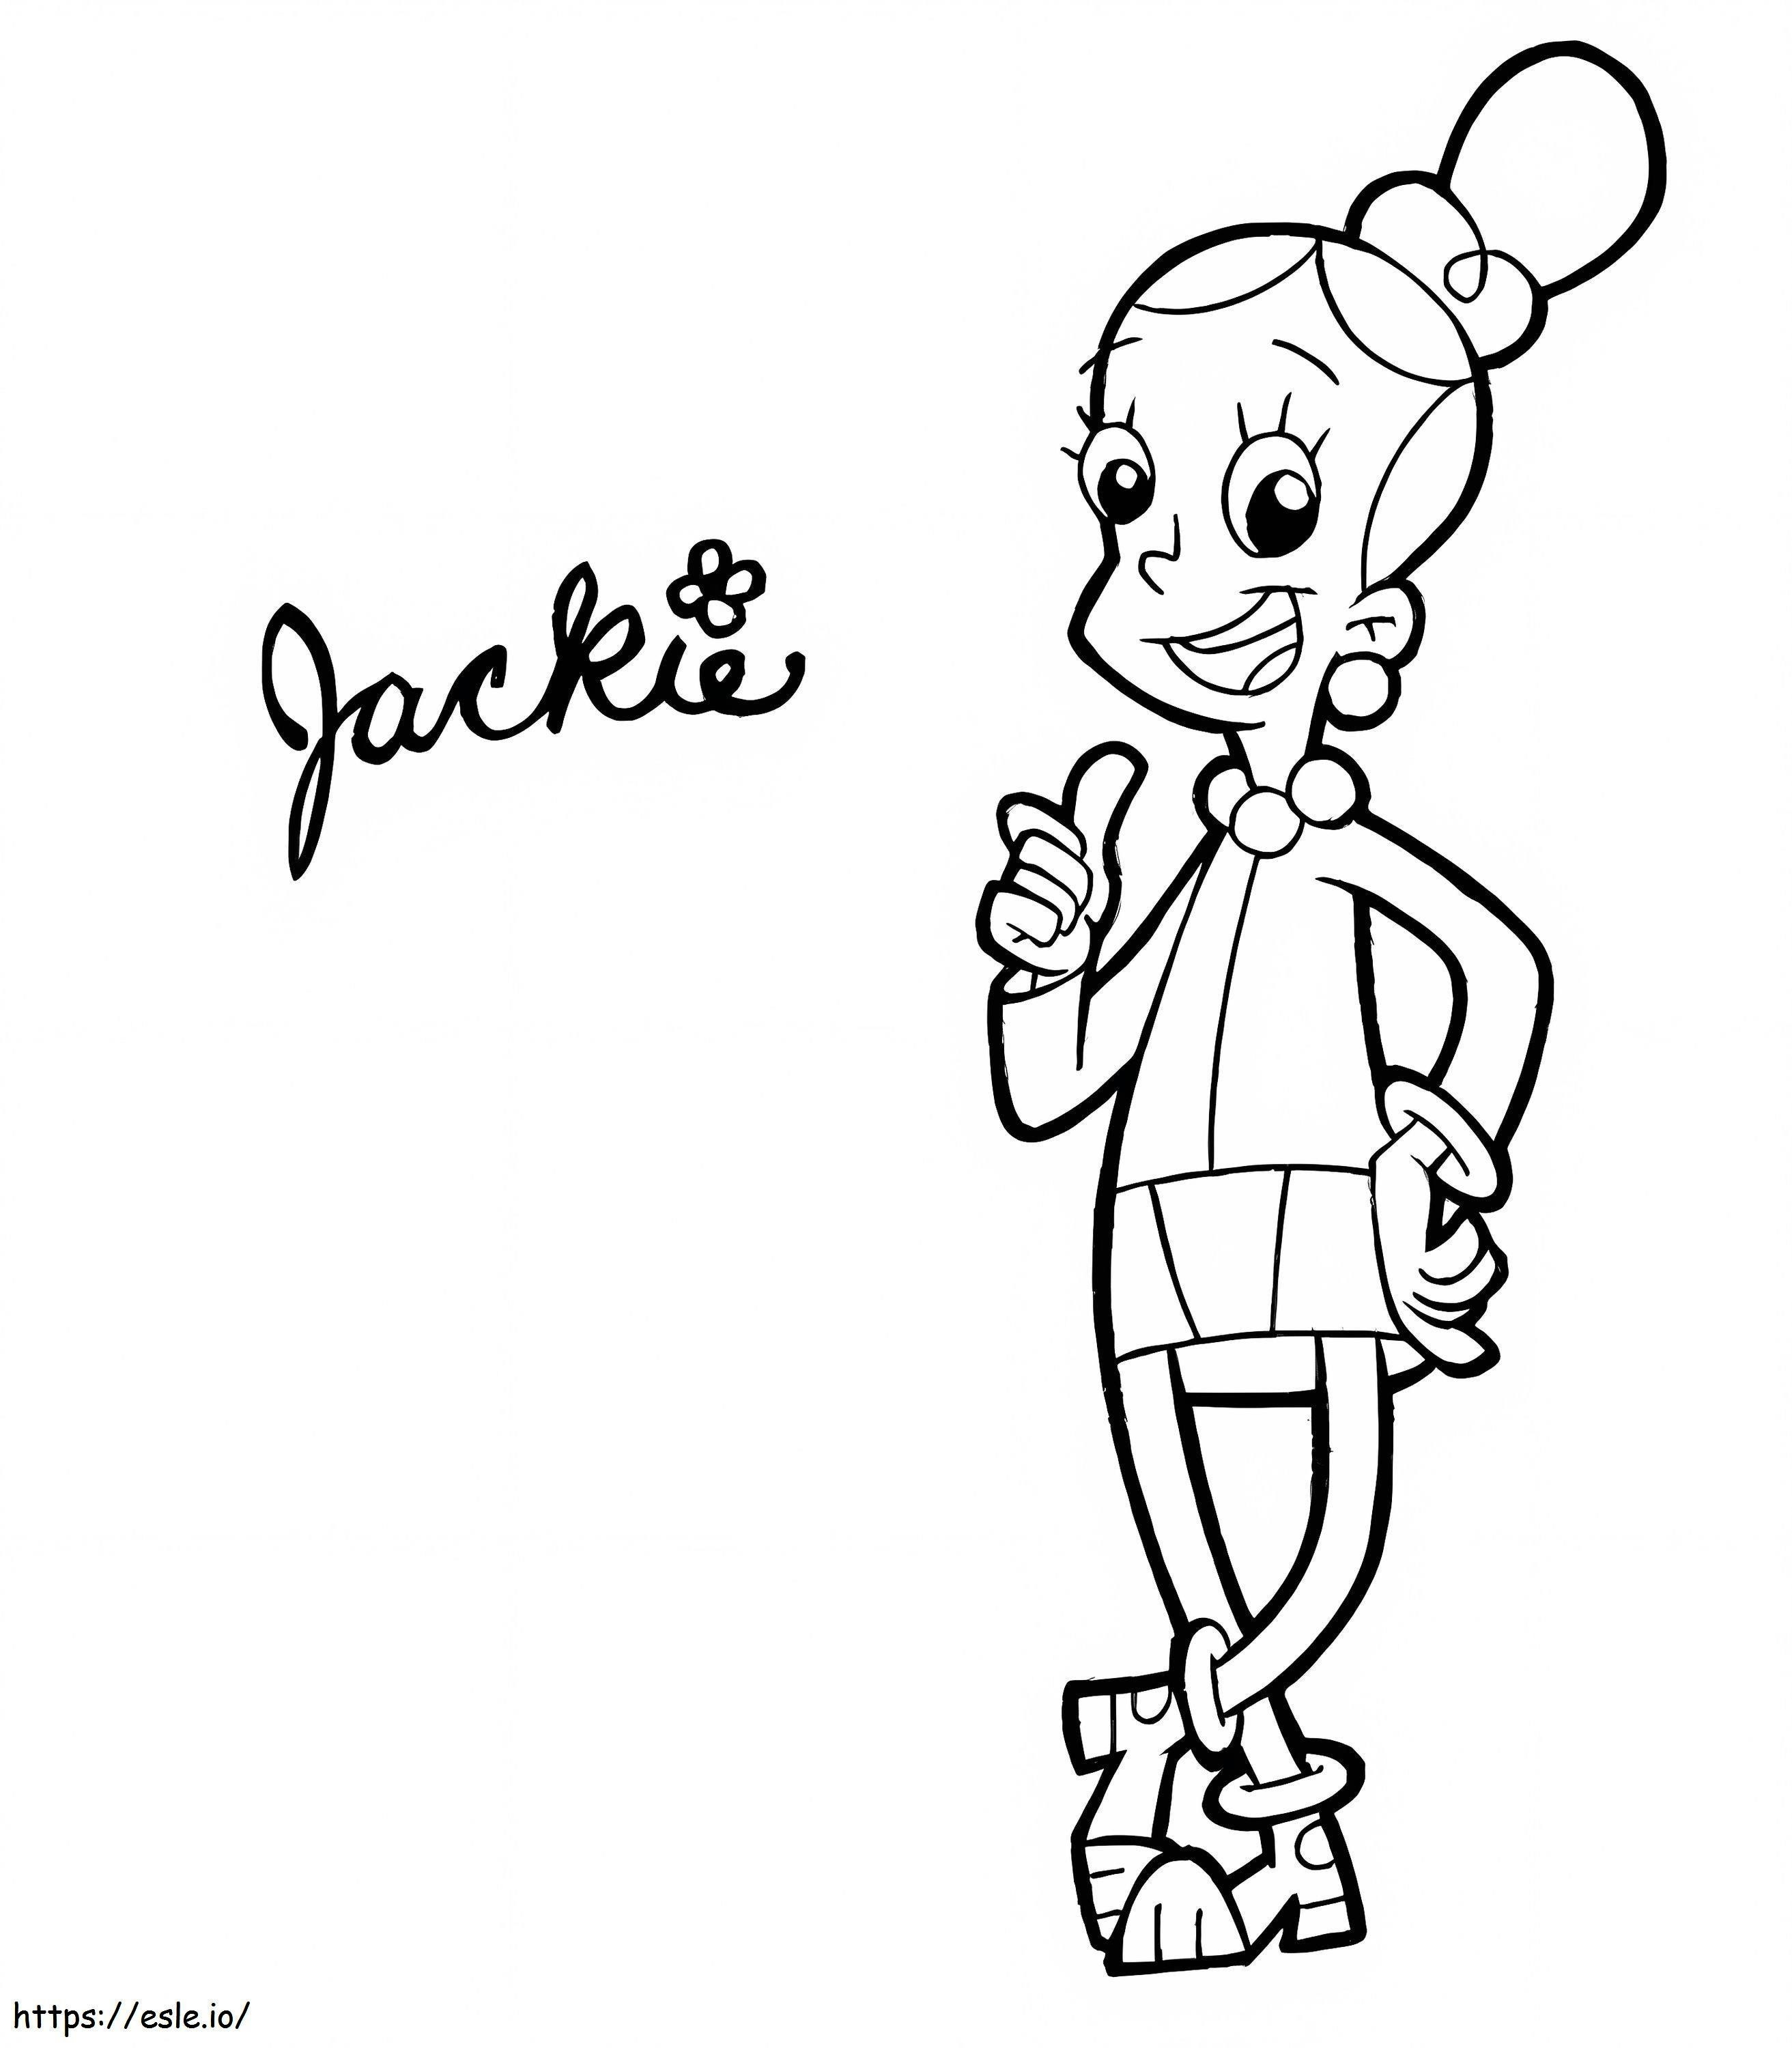 Jackie Cyberchase Smiling coloring page